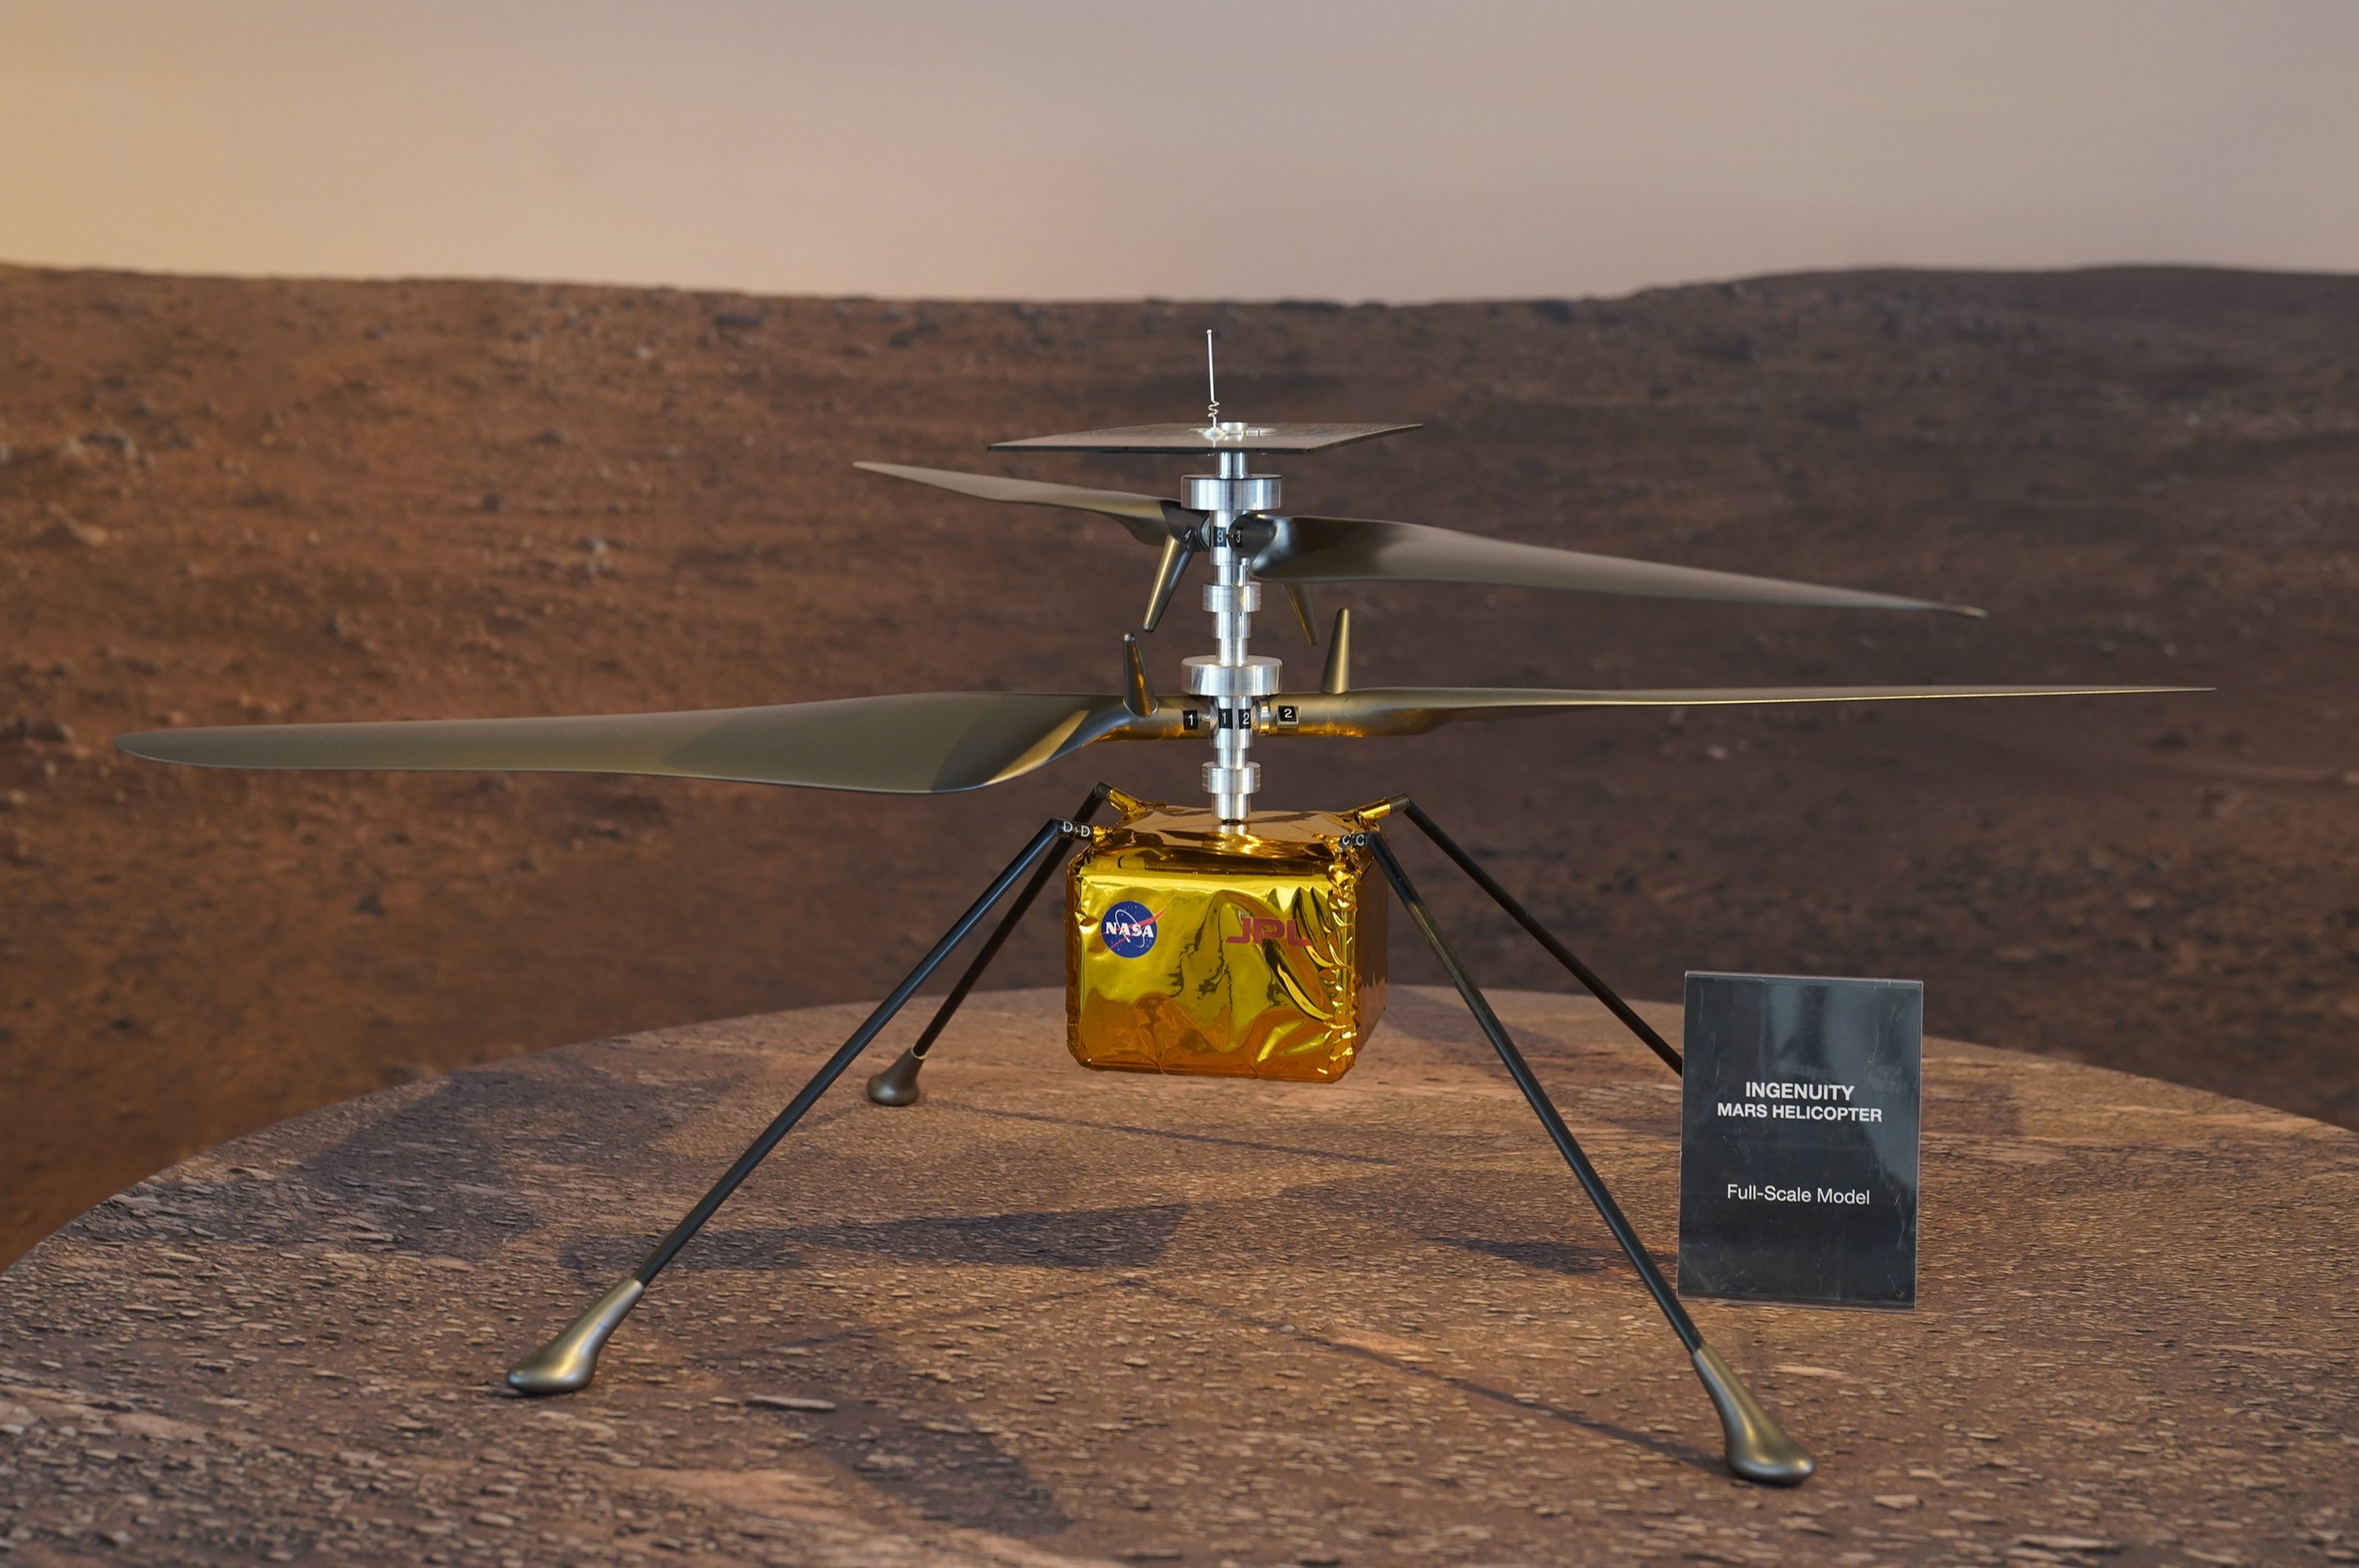 NASA's Ingenuity helicopter to make first Mars flight in April | Daily Sabah